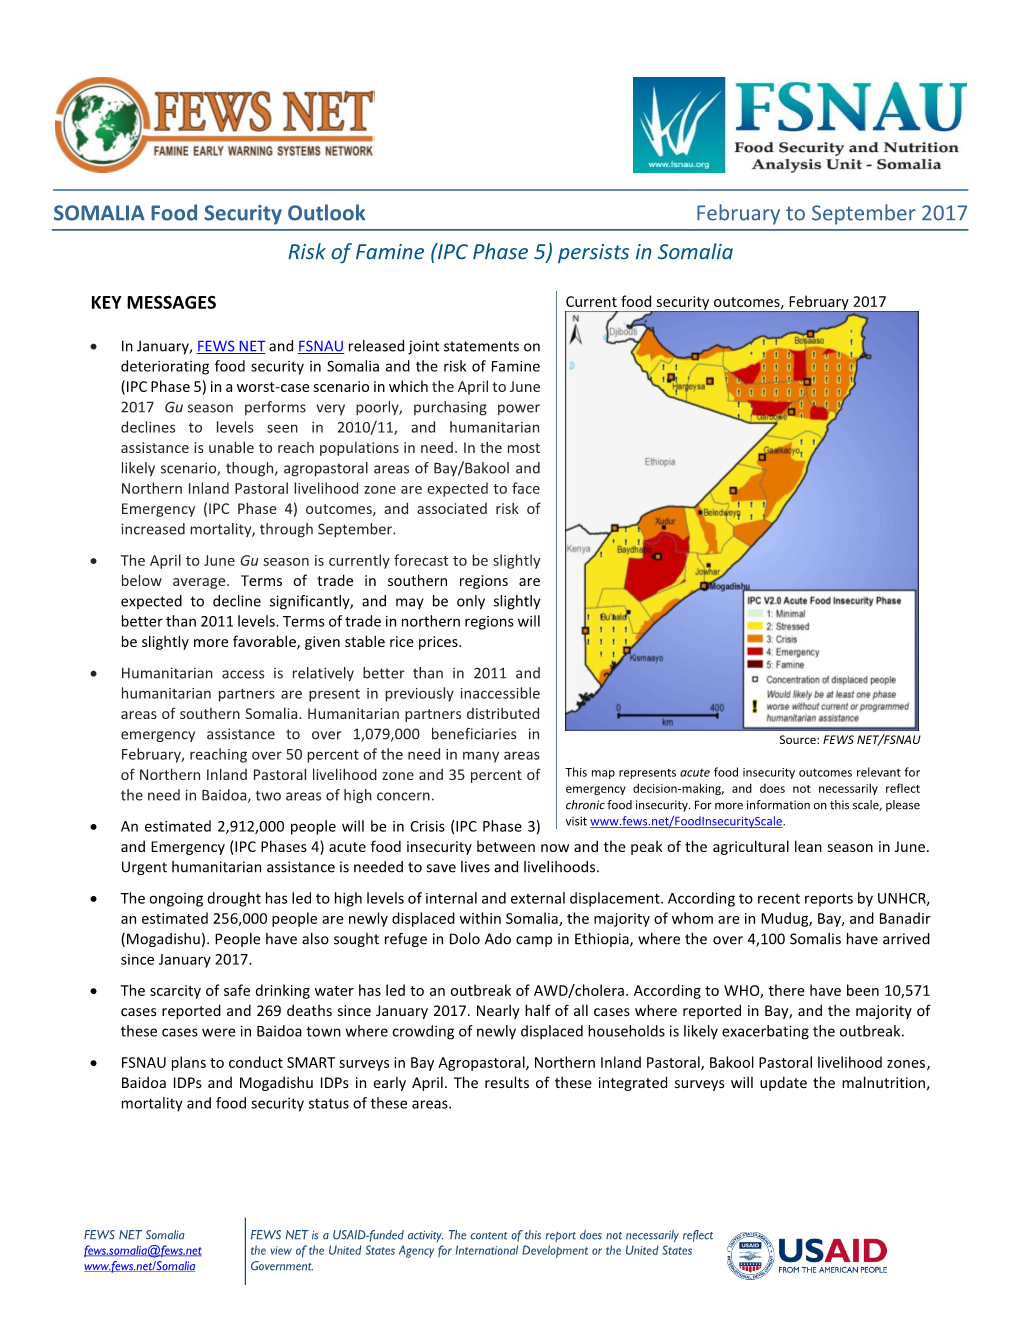 Somalia Food Security Outlook, February to September 2017